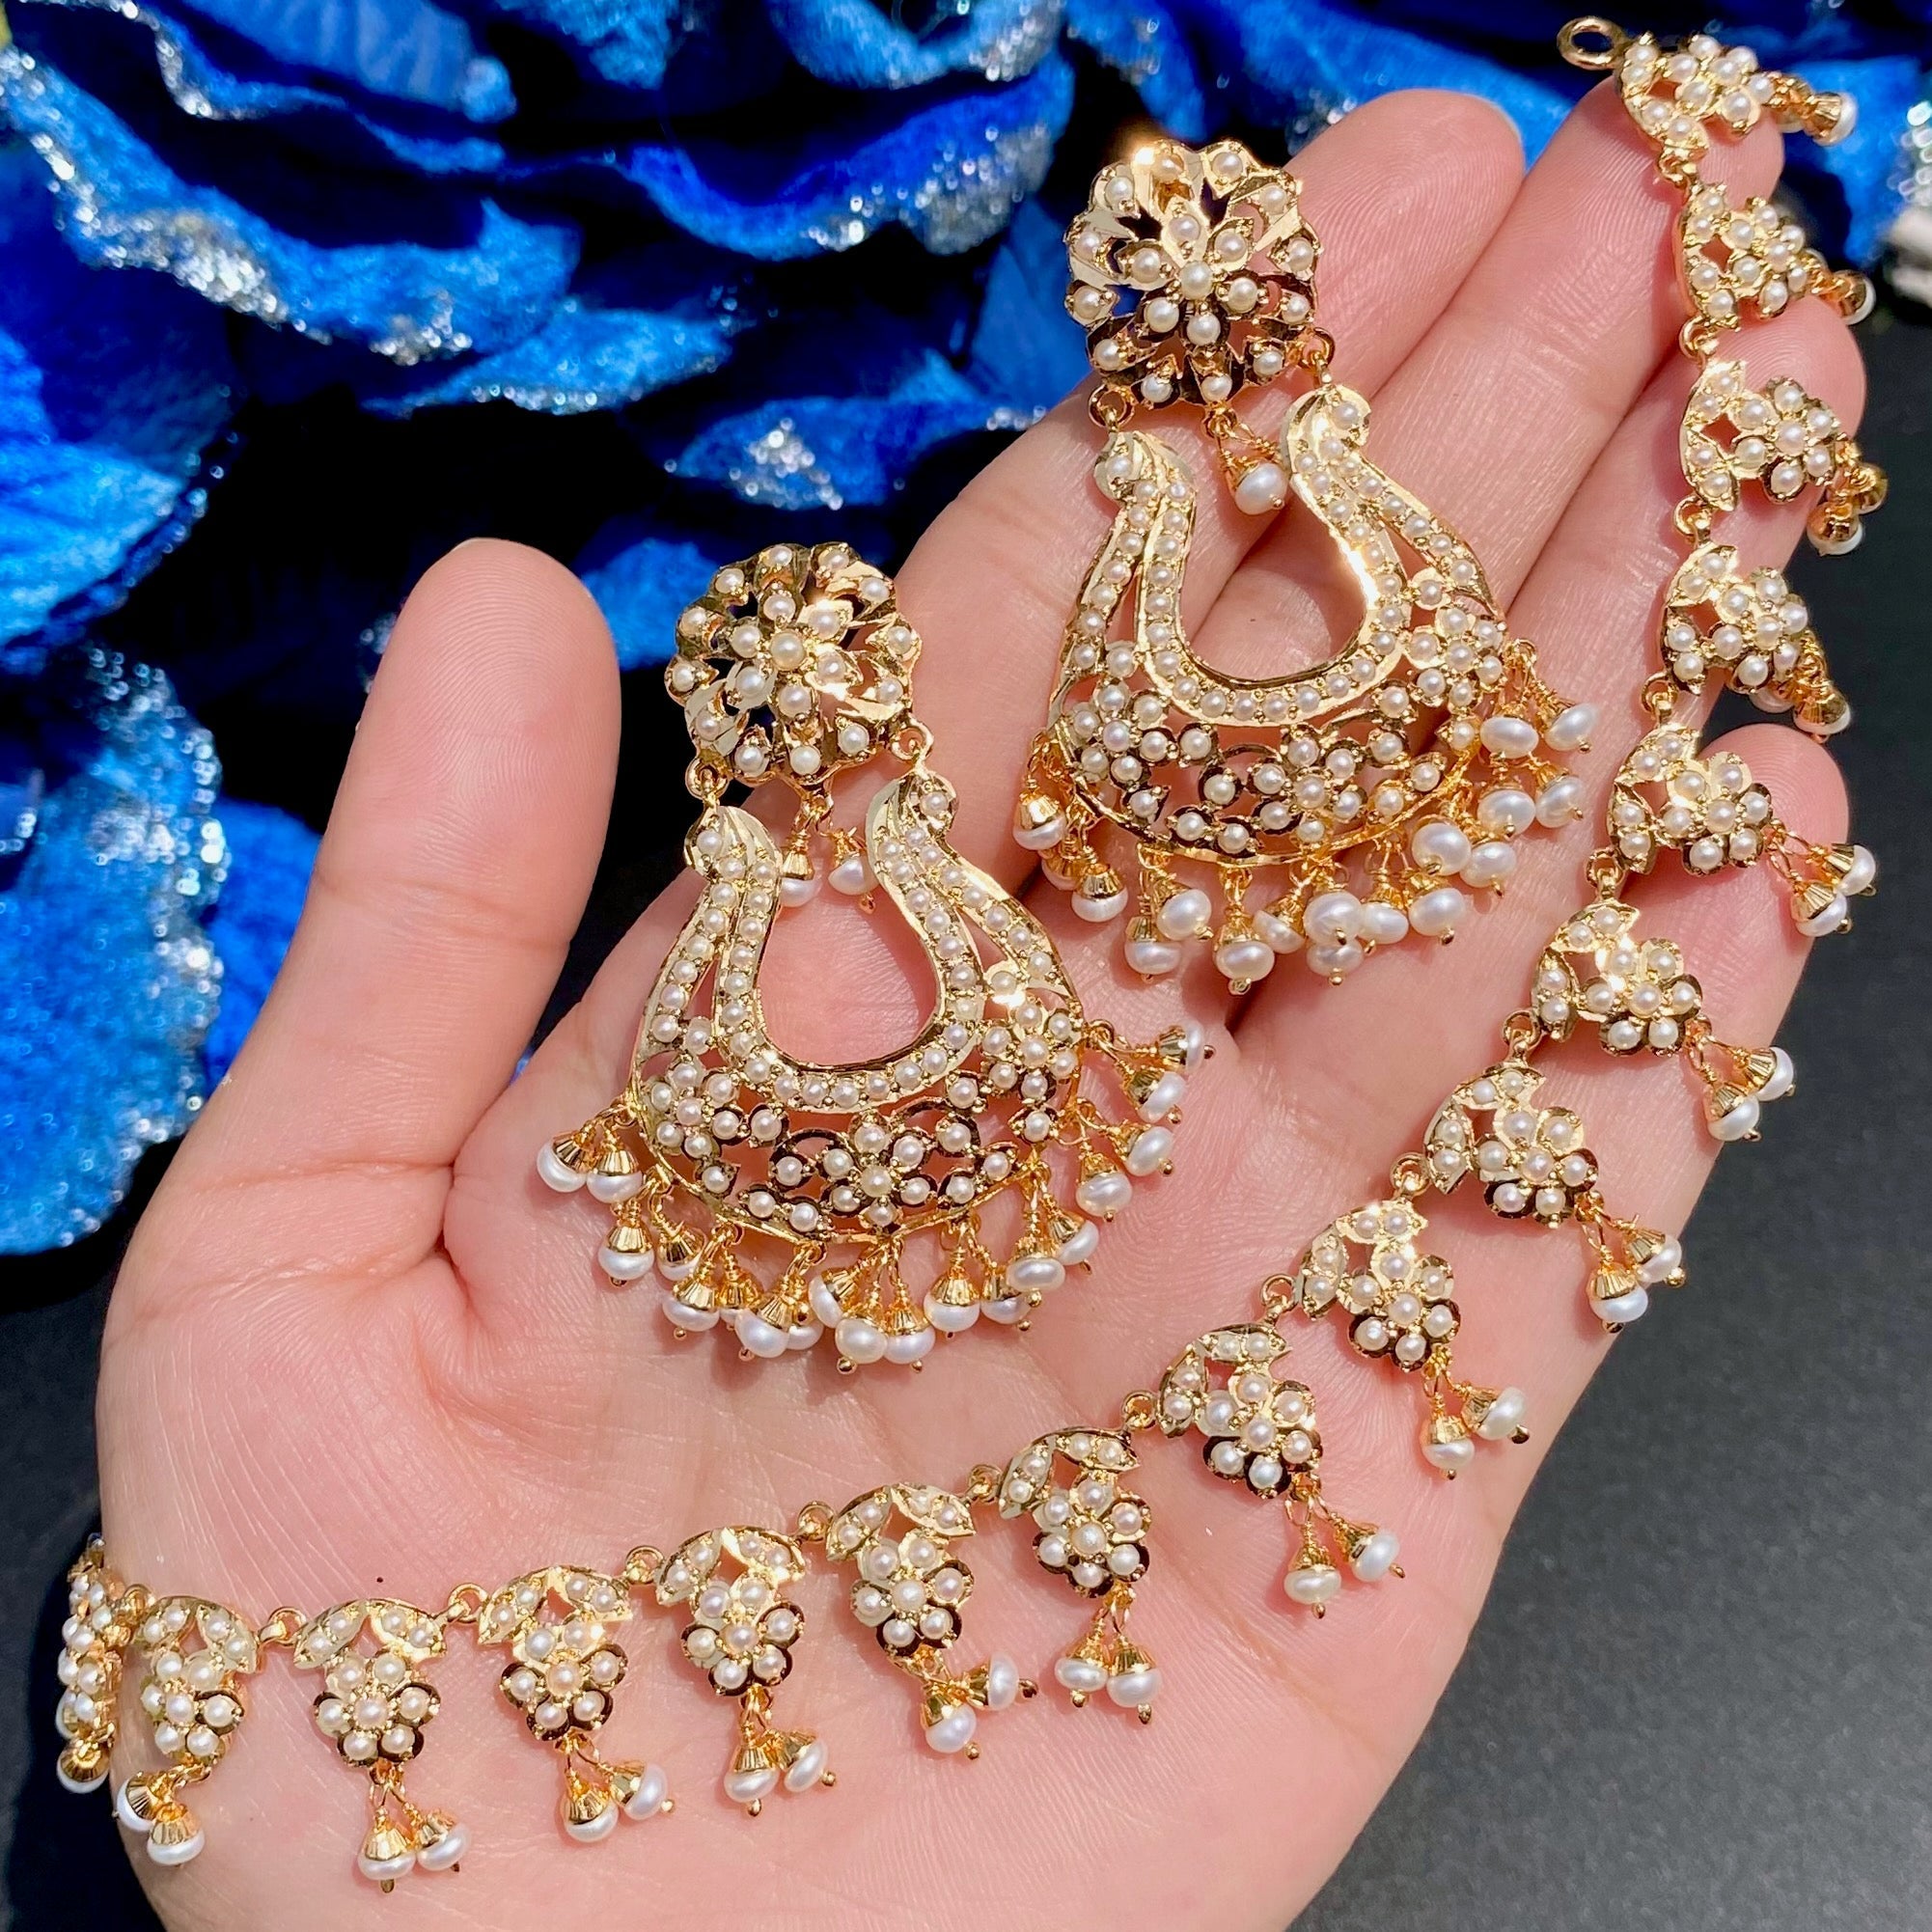 Freshwater Pearl Jewelry | Heritage Bollywood Handcraft | Gold Plated Silver